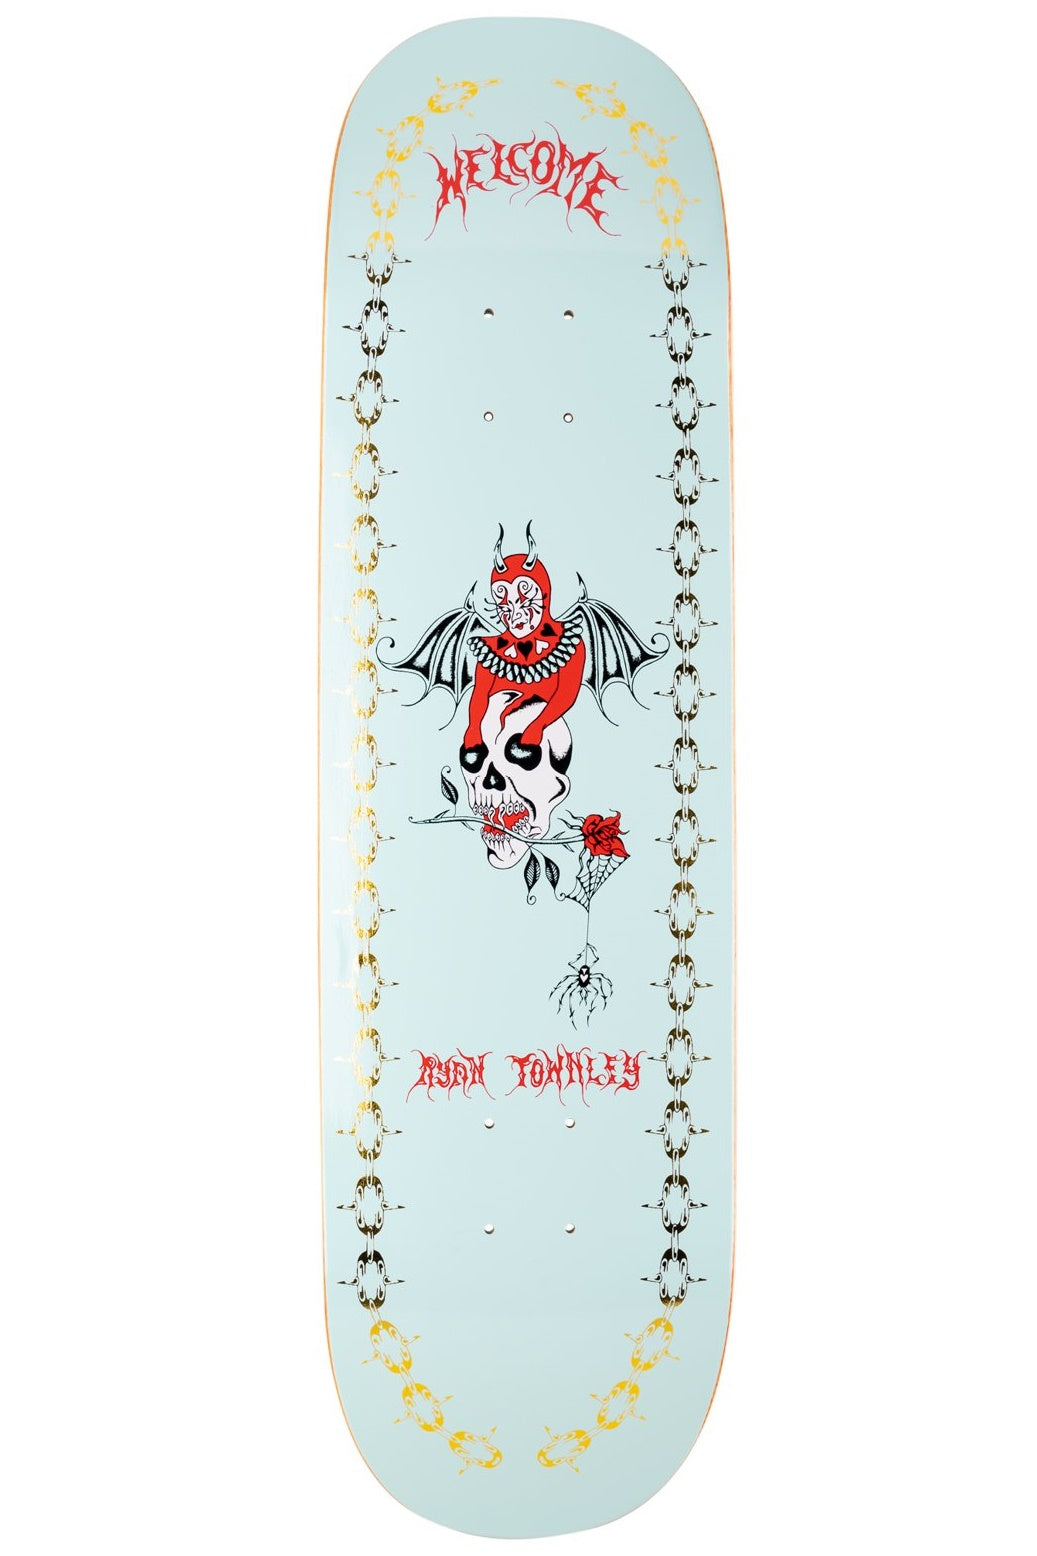 WELCOME Ryan Townley Angel on Enenra Deck 8.5"